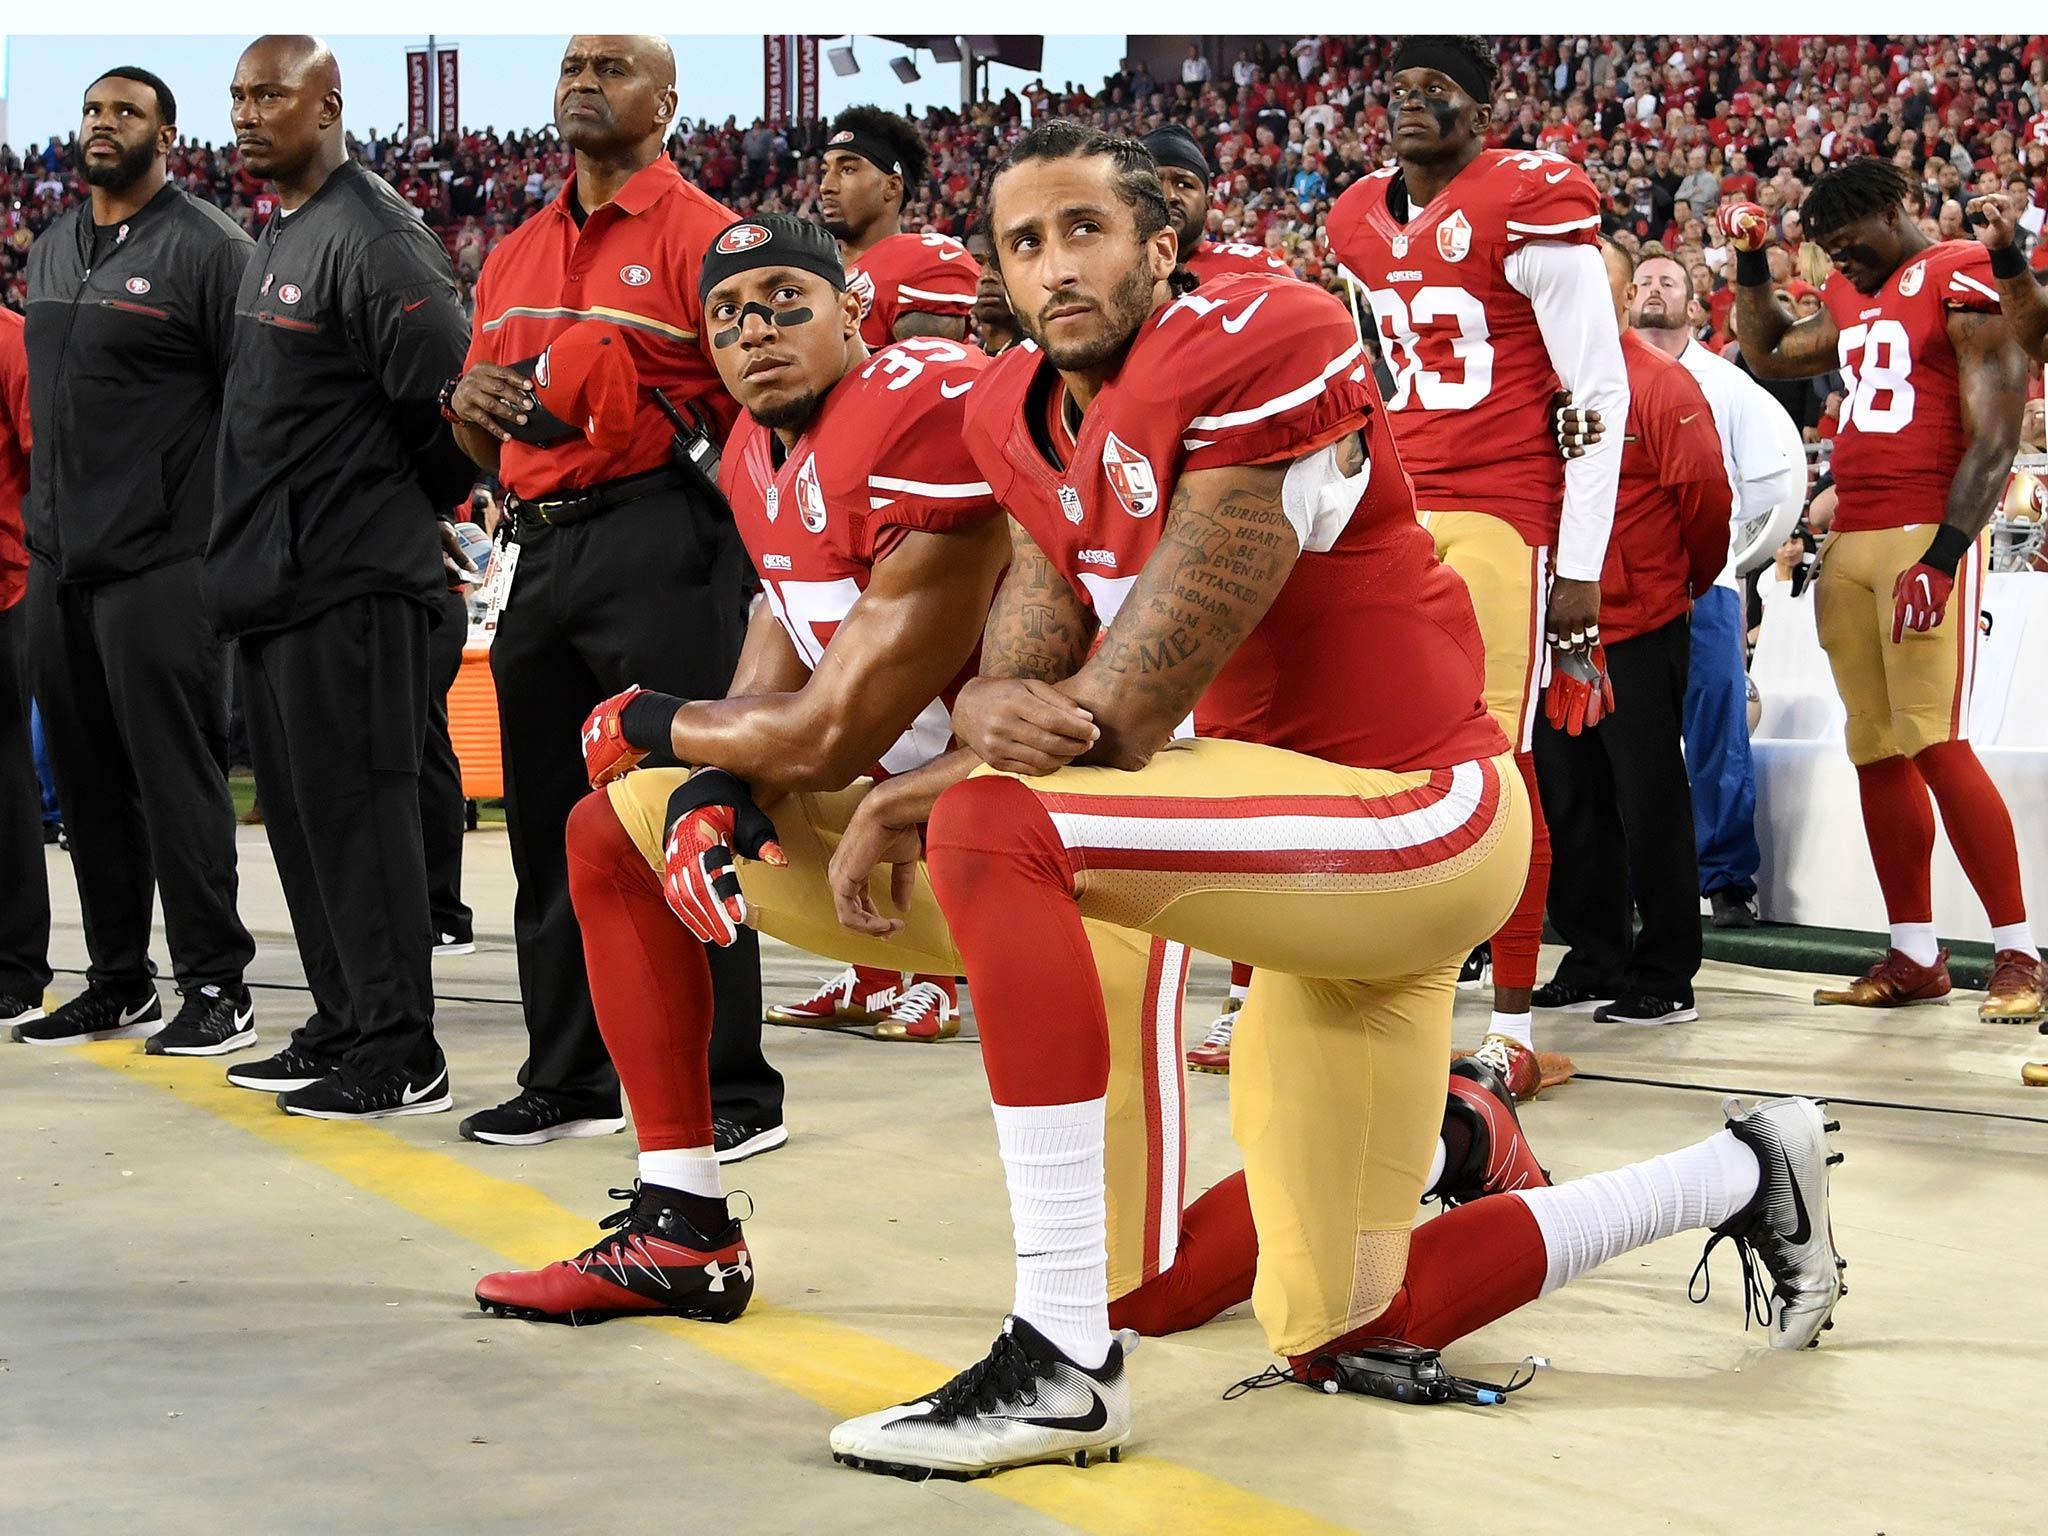 Eric Reid and Colin Kaepernick taking a knee in protest (Getty)